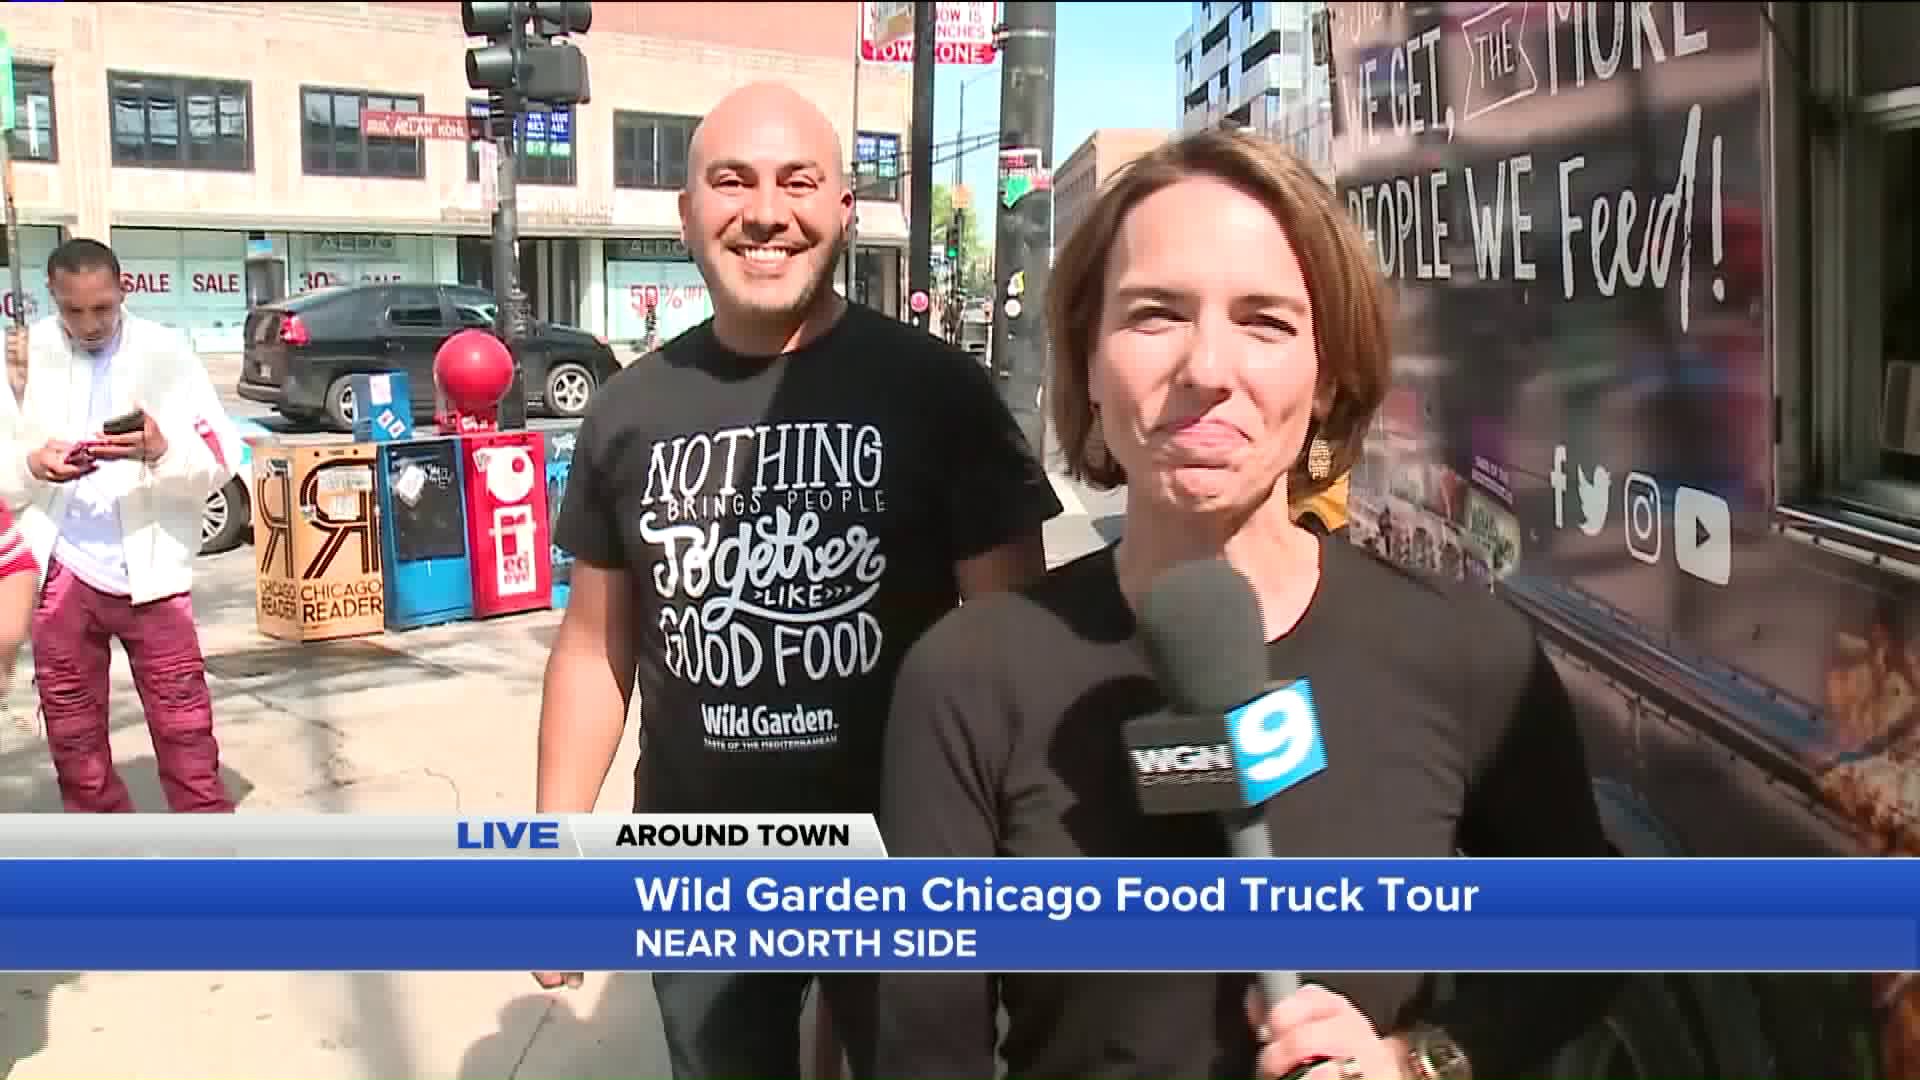 Around Town hands out free food with help from Wild Garden